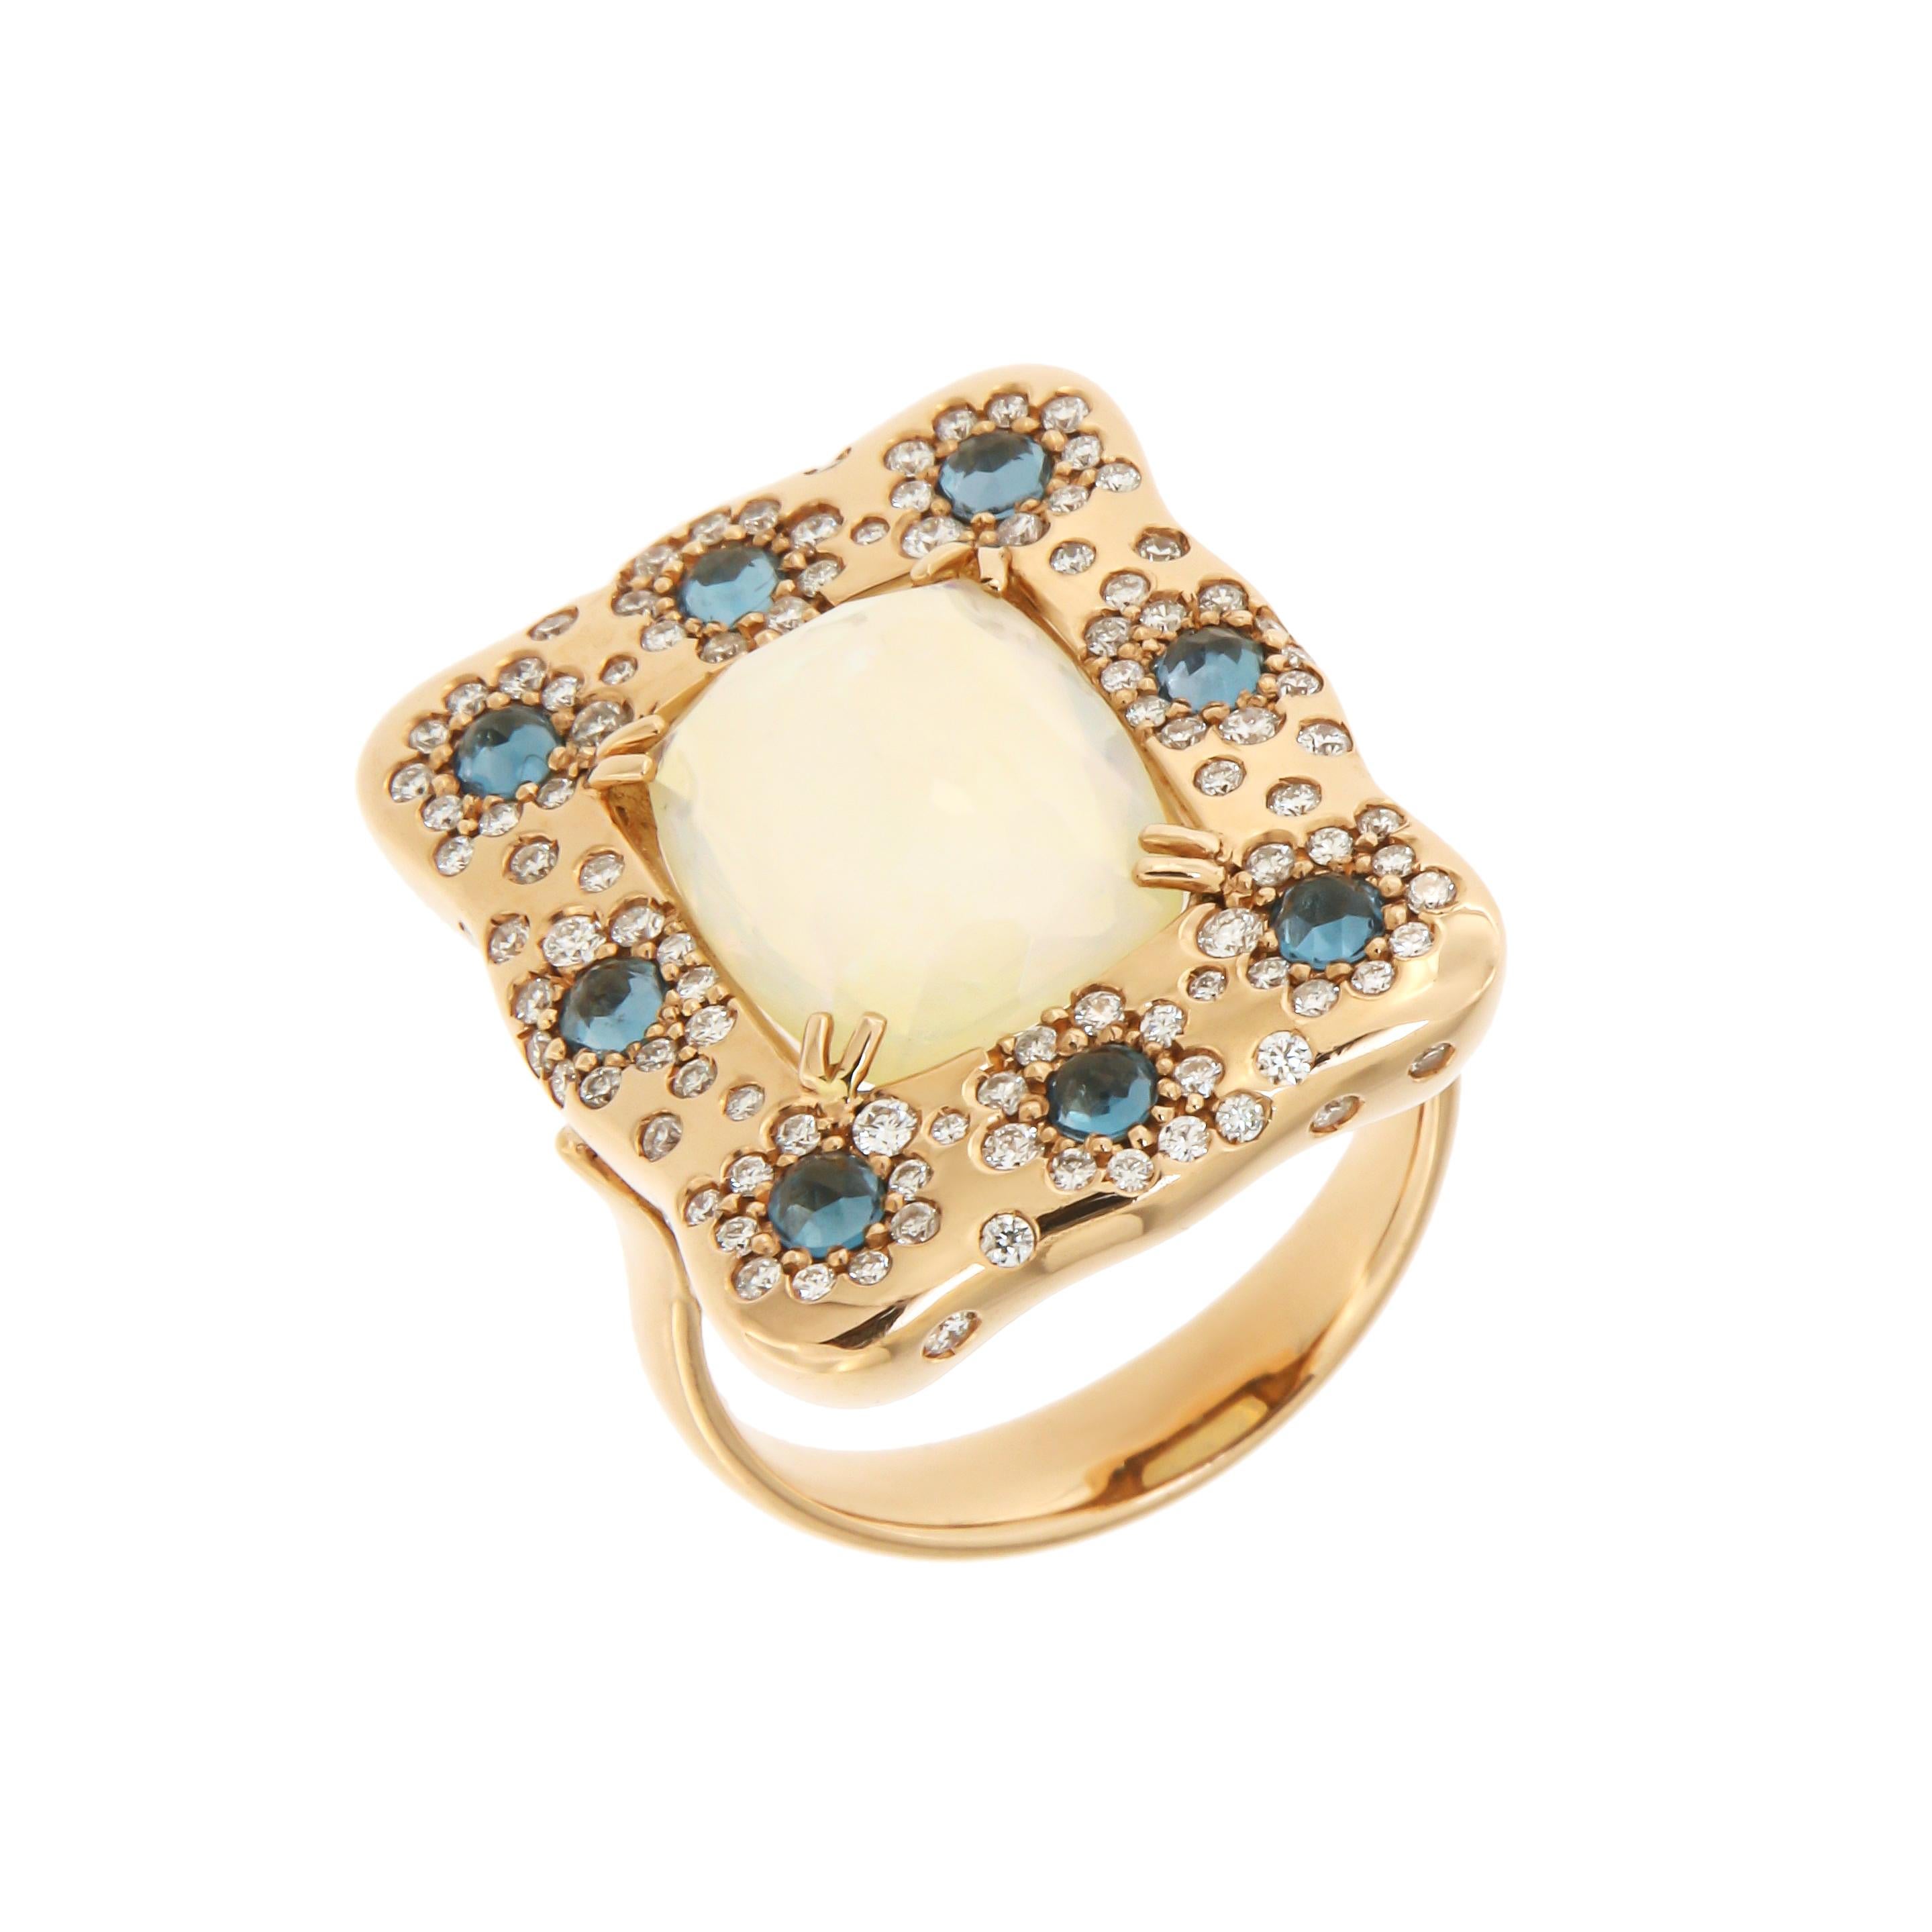 Ring Rose Gold 18 K 
Diamond 0,73 ct
London Blue Topaz 
Opal

Weight 10.8 grams
Size 14

With a heritage of ancient fine Swiss jewelry traditions, NATKINA is a Geneva based jewellery brand, which creates modern jewellery masterpieces suitable for